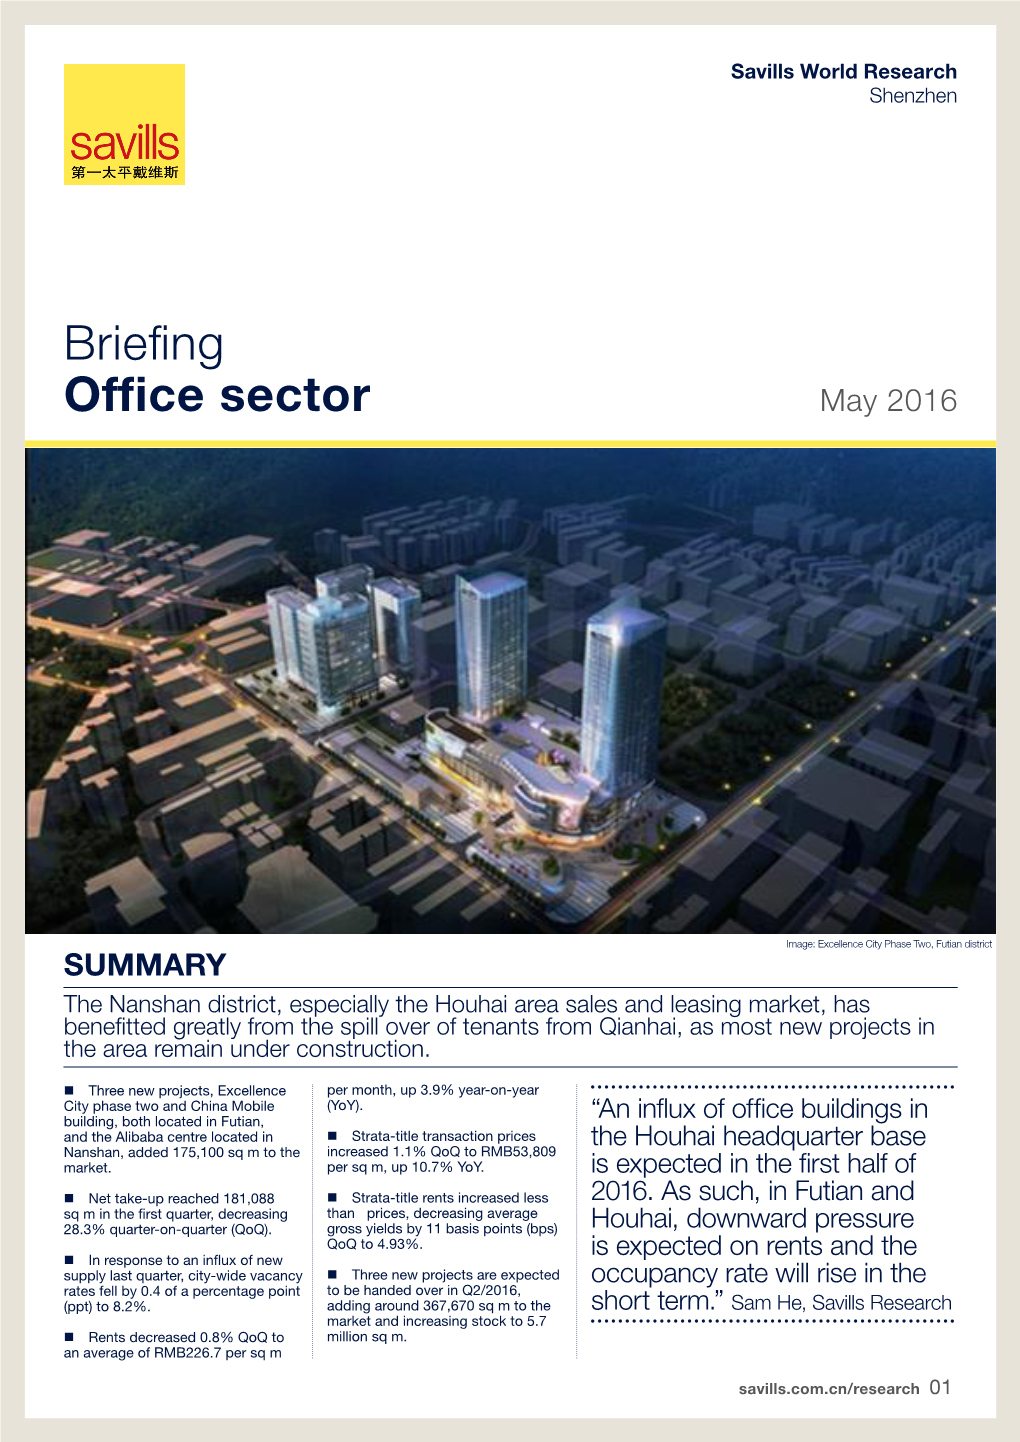 Briefing Office Sector May 2016